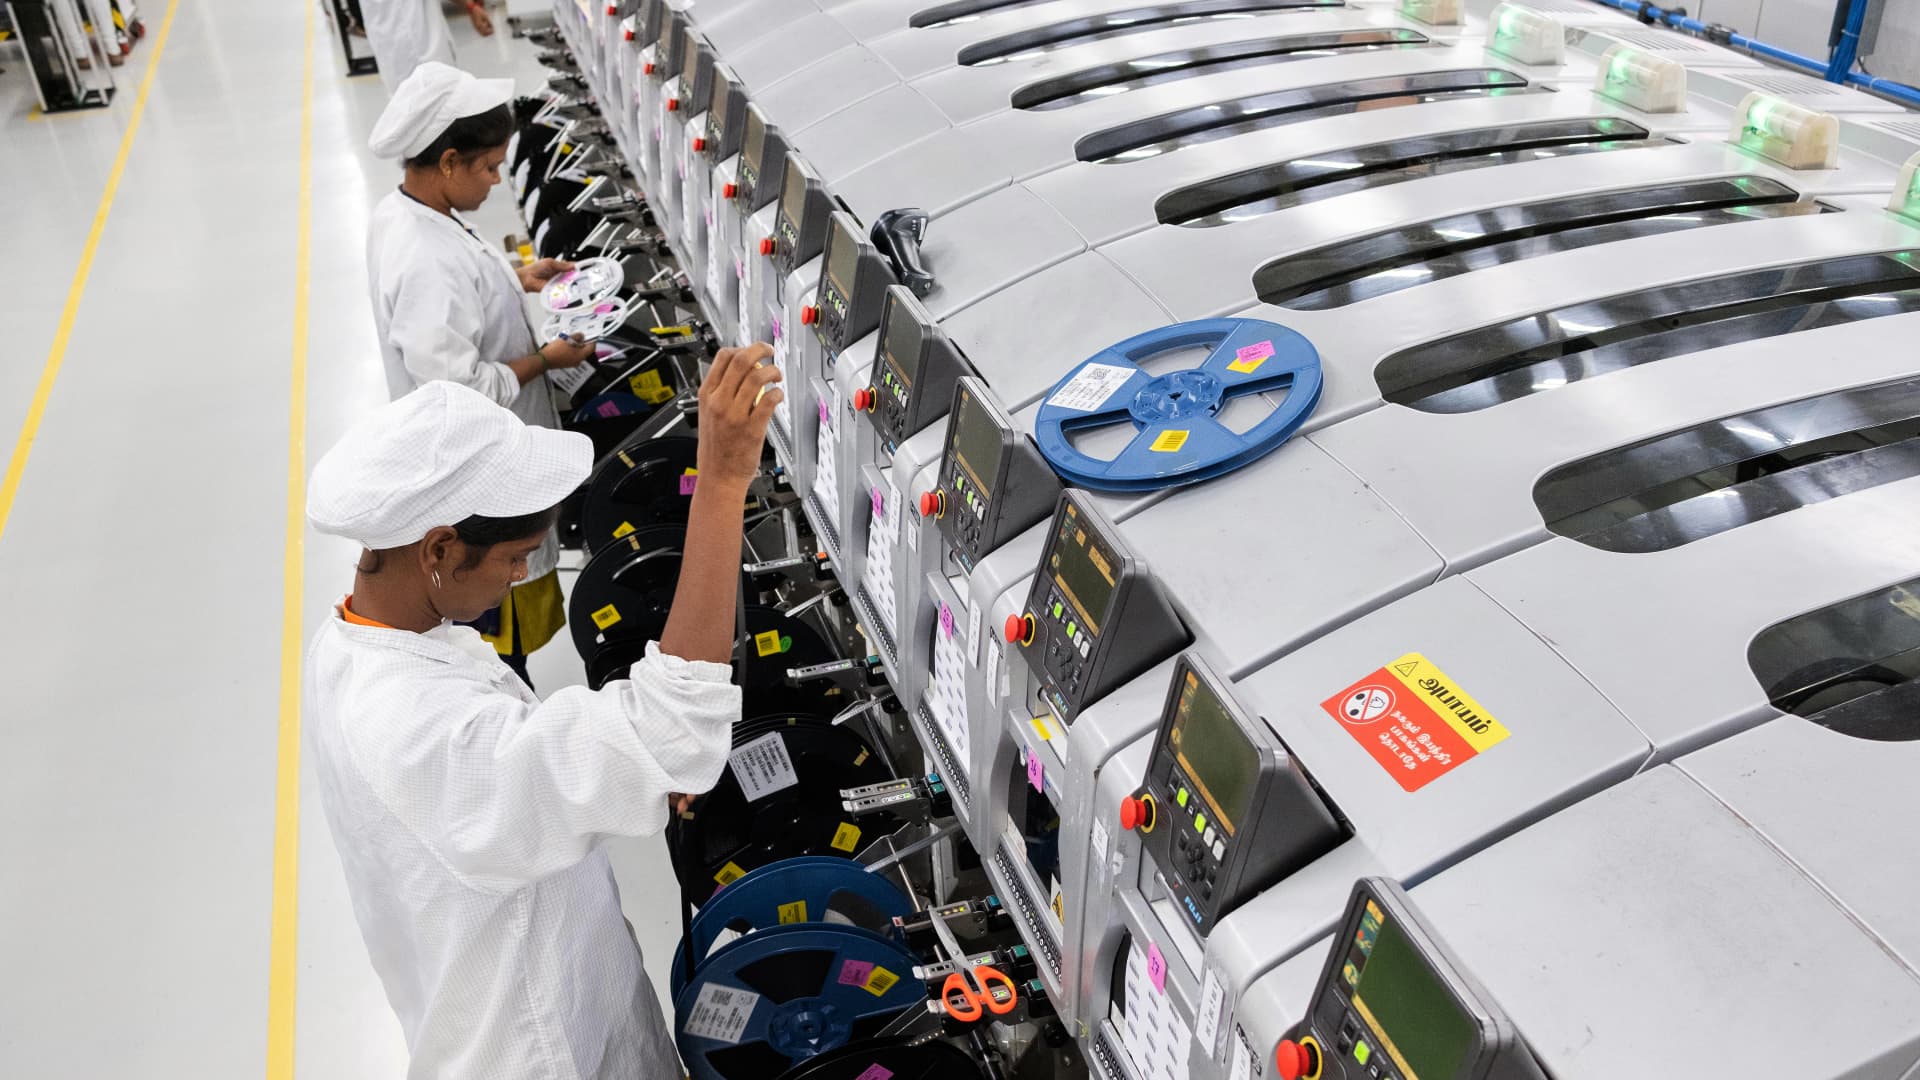 Apple supplier Foxconn expects decline in consumer electronics demand